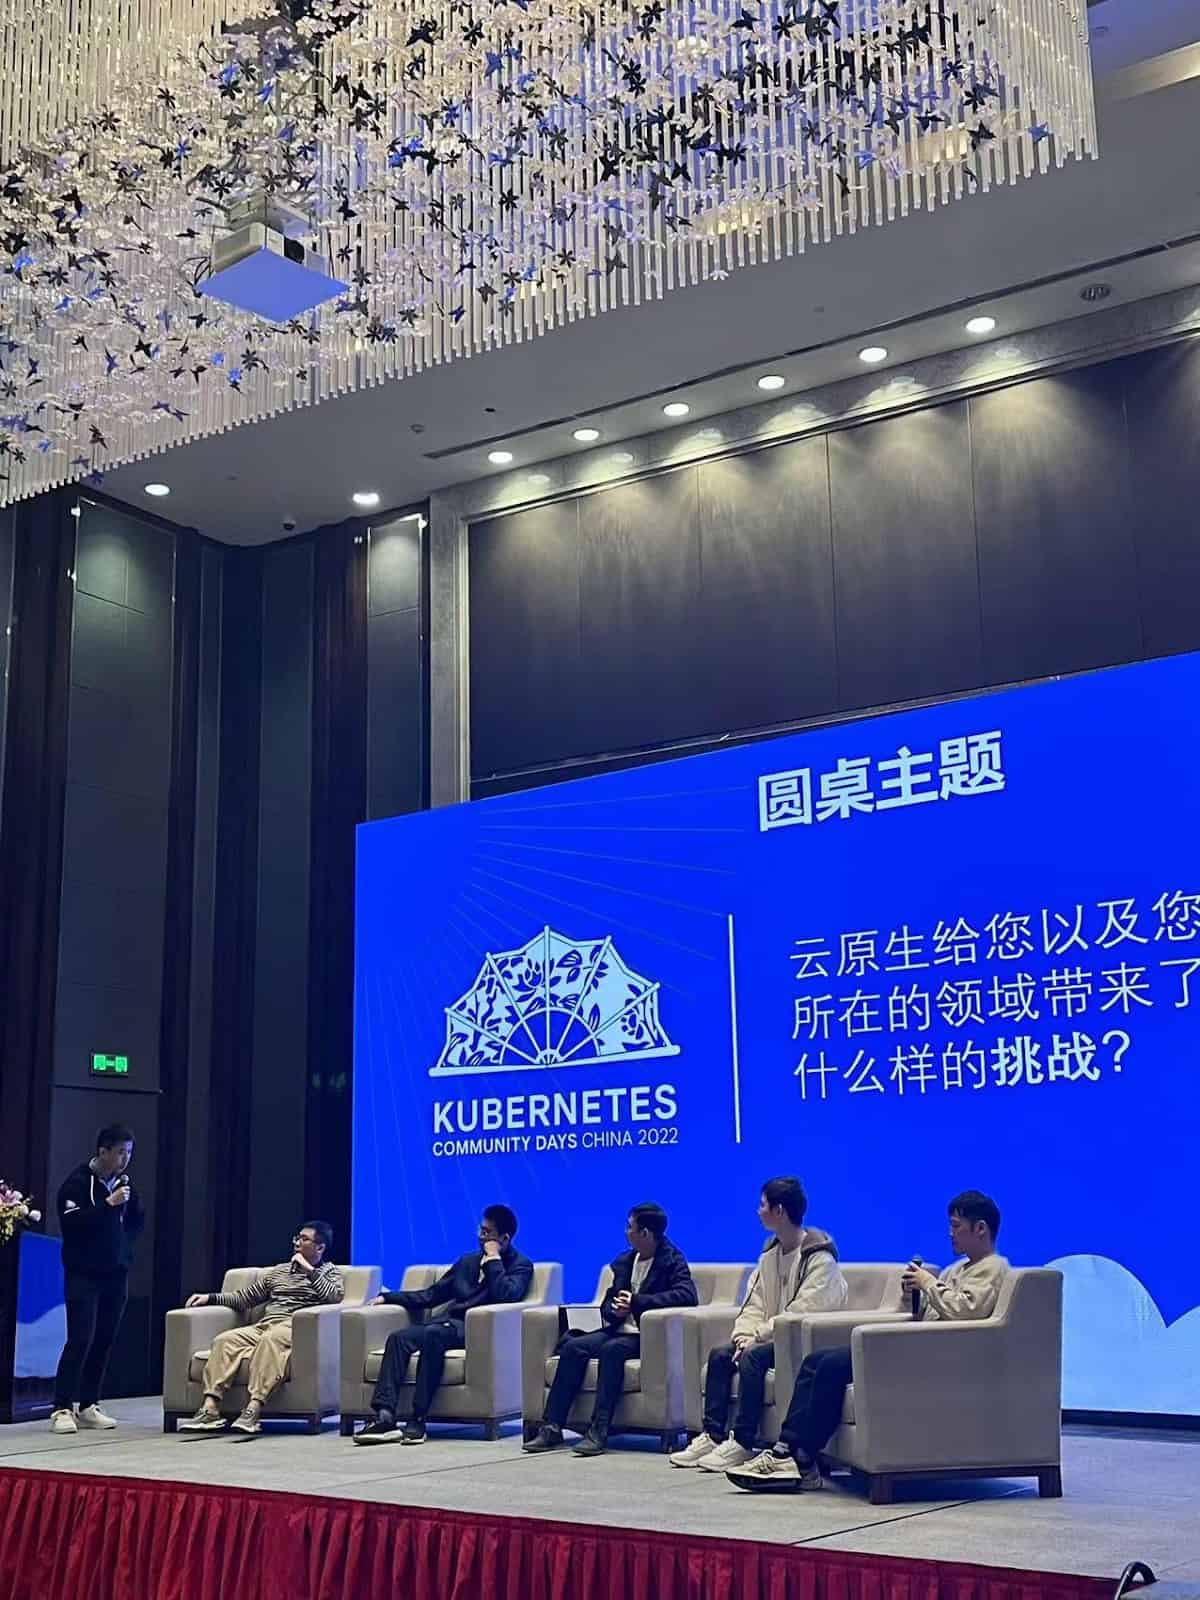 Gentlemen as speakers sitting on the stage of Kubernetes Community Days China 2022 lead by moderator